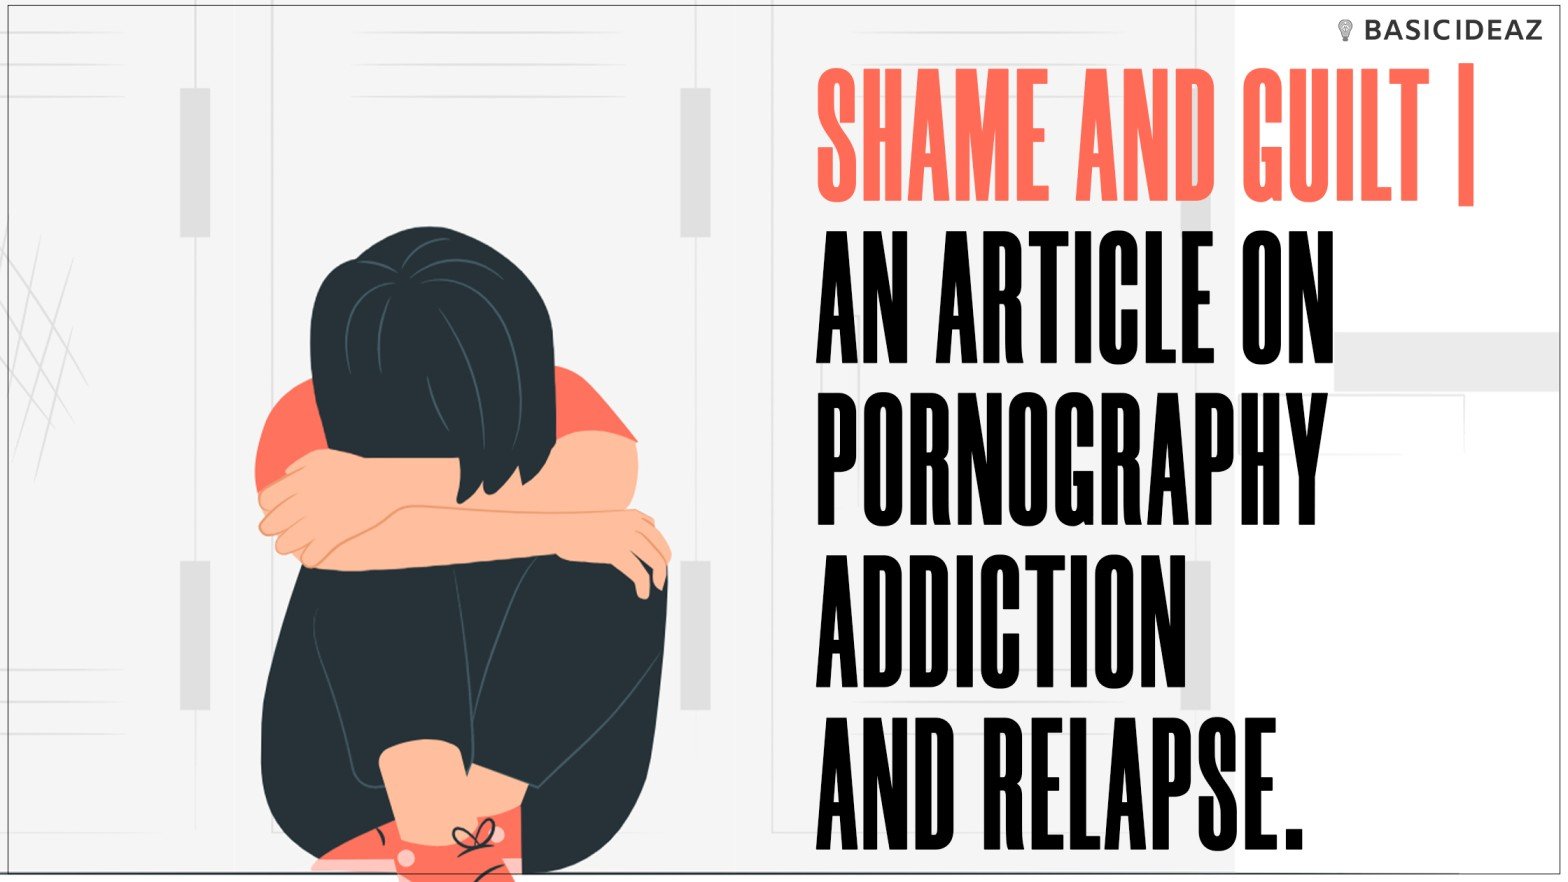 Shame And Guilt An Article On Pornography Addiction And Relapse